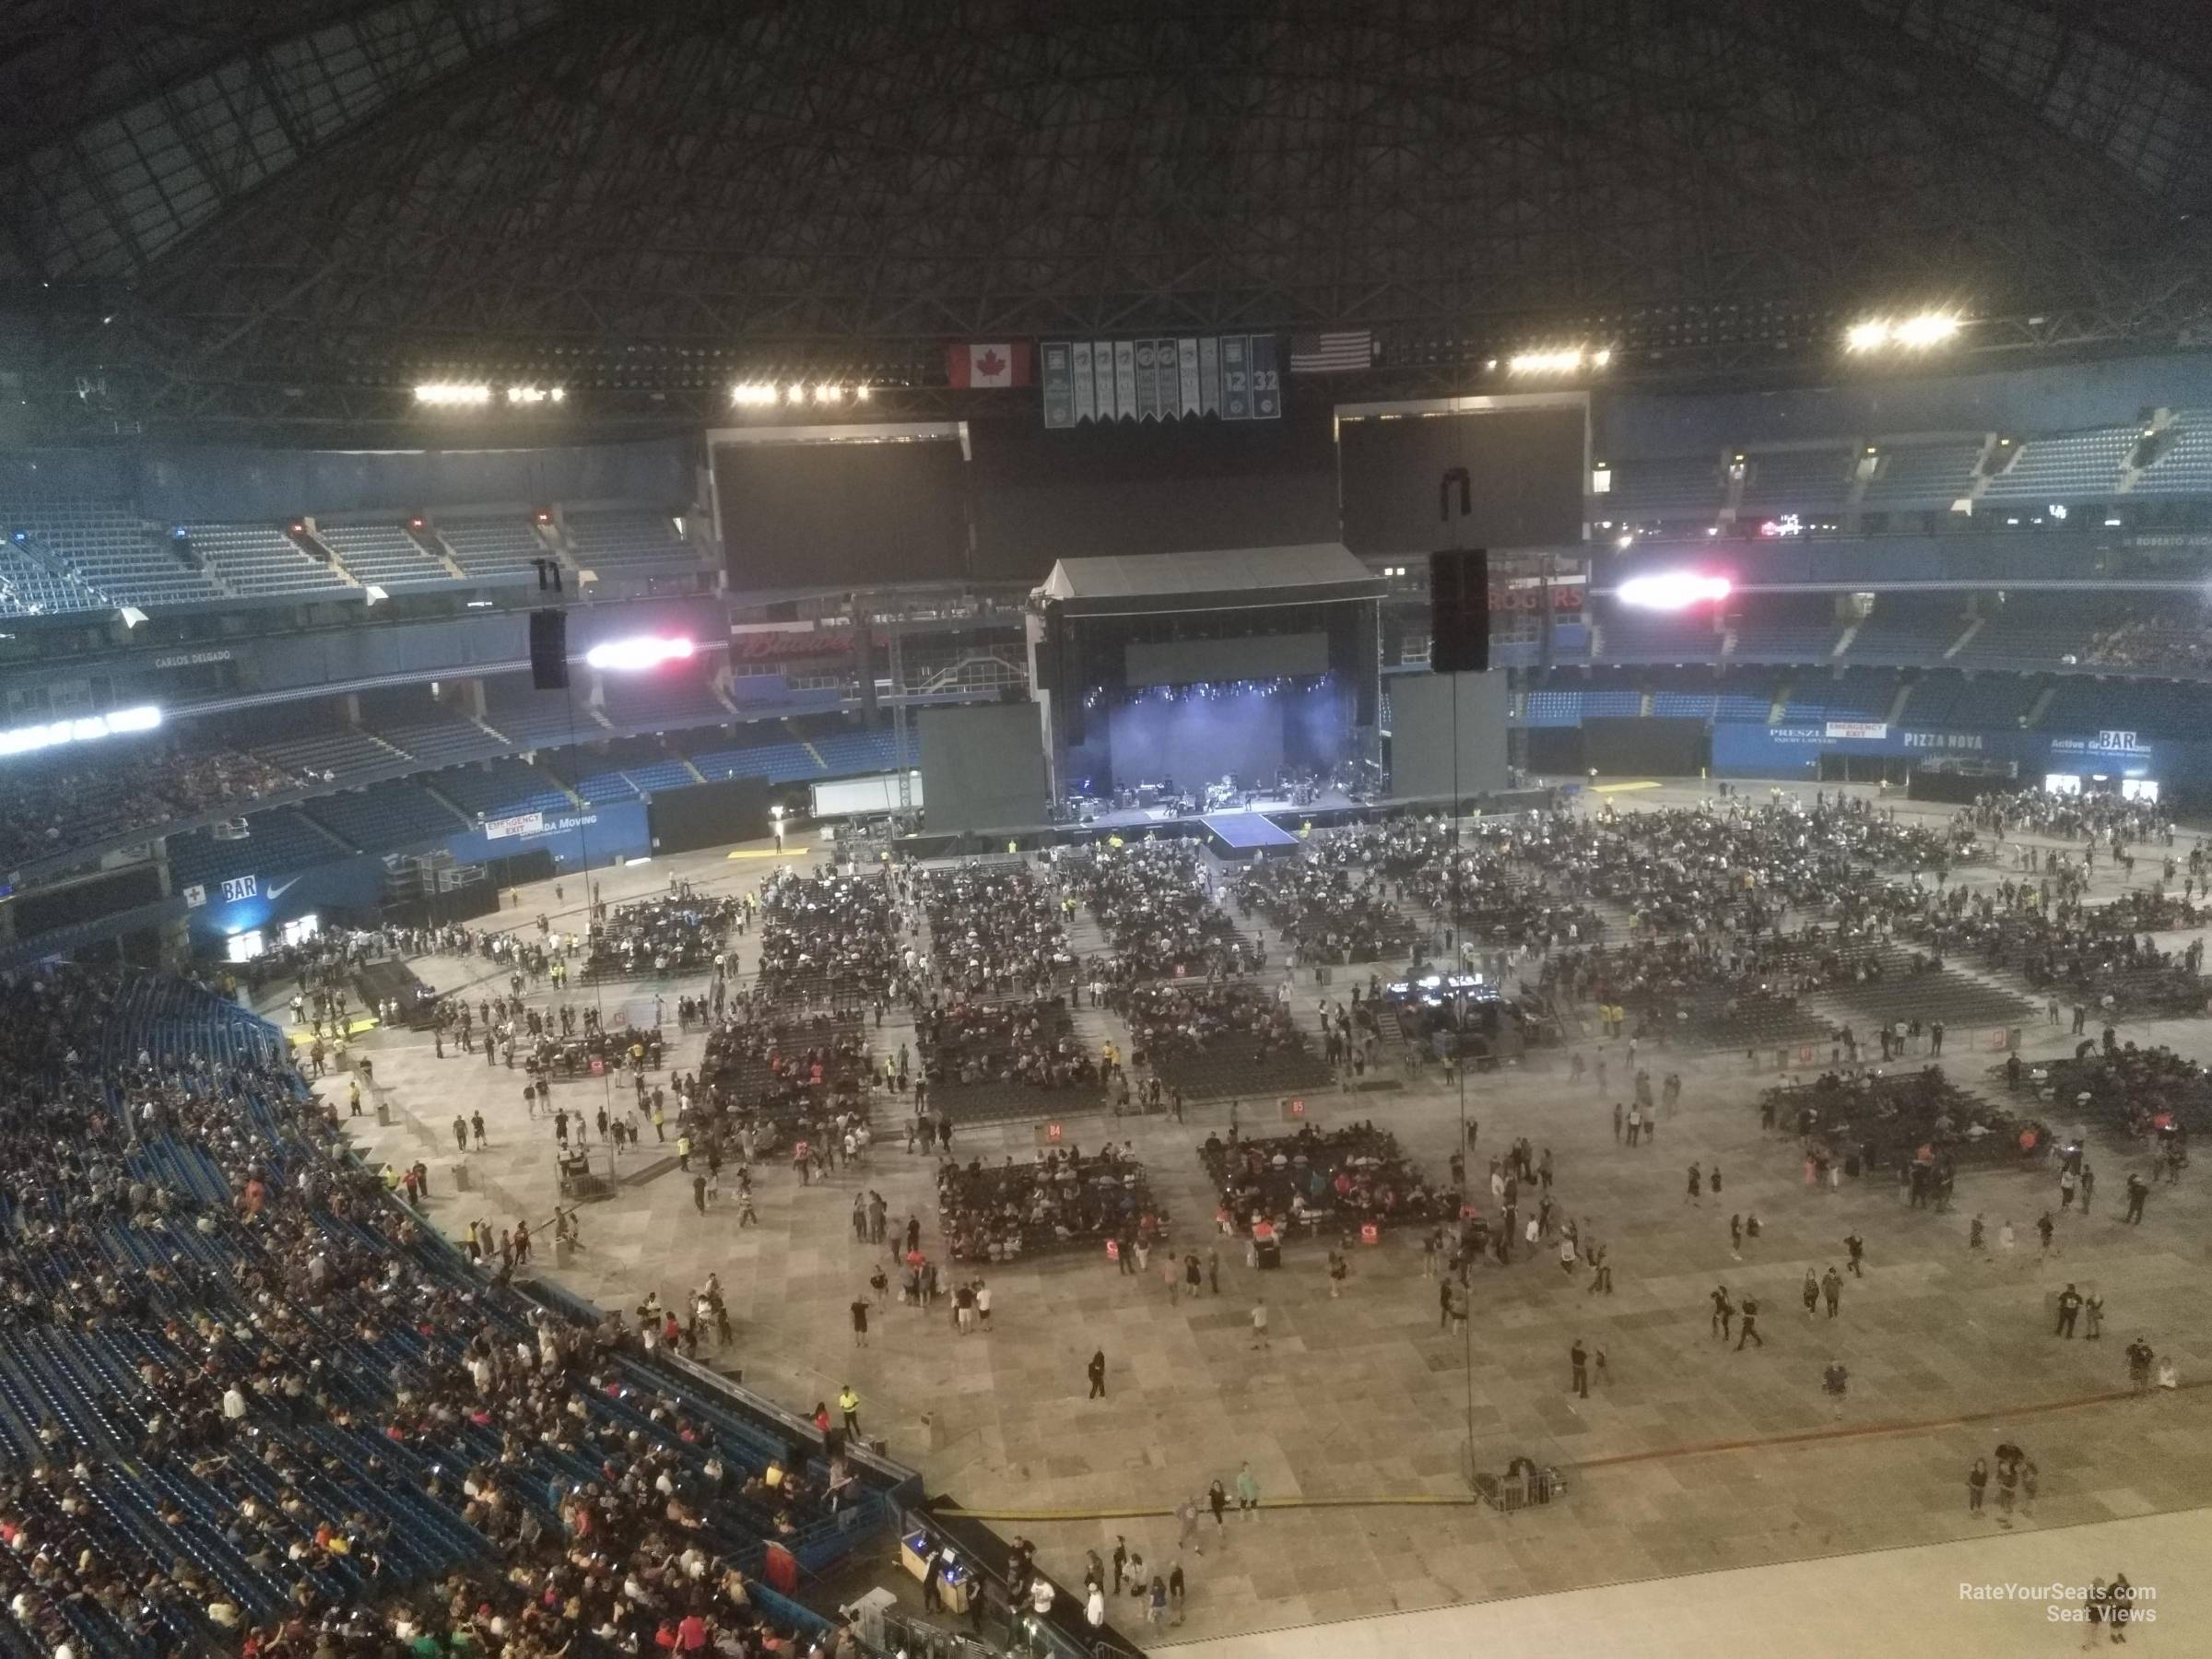 section 526, row 5 seat view  for concert - rogers centre